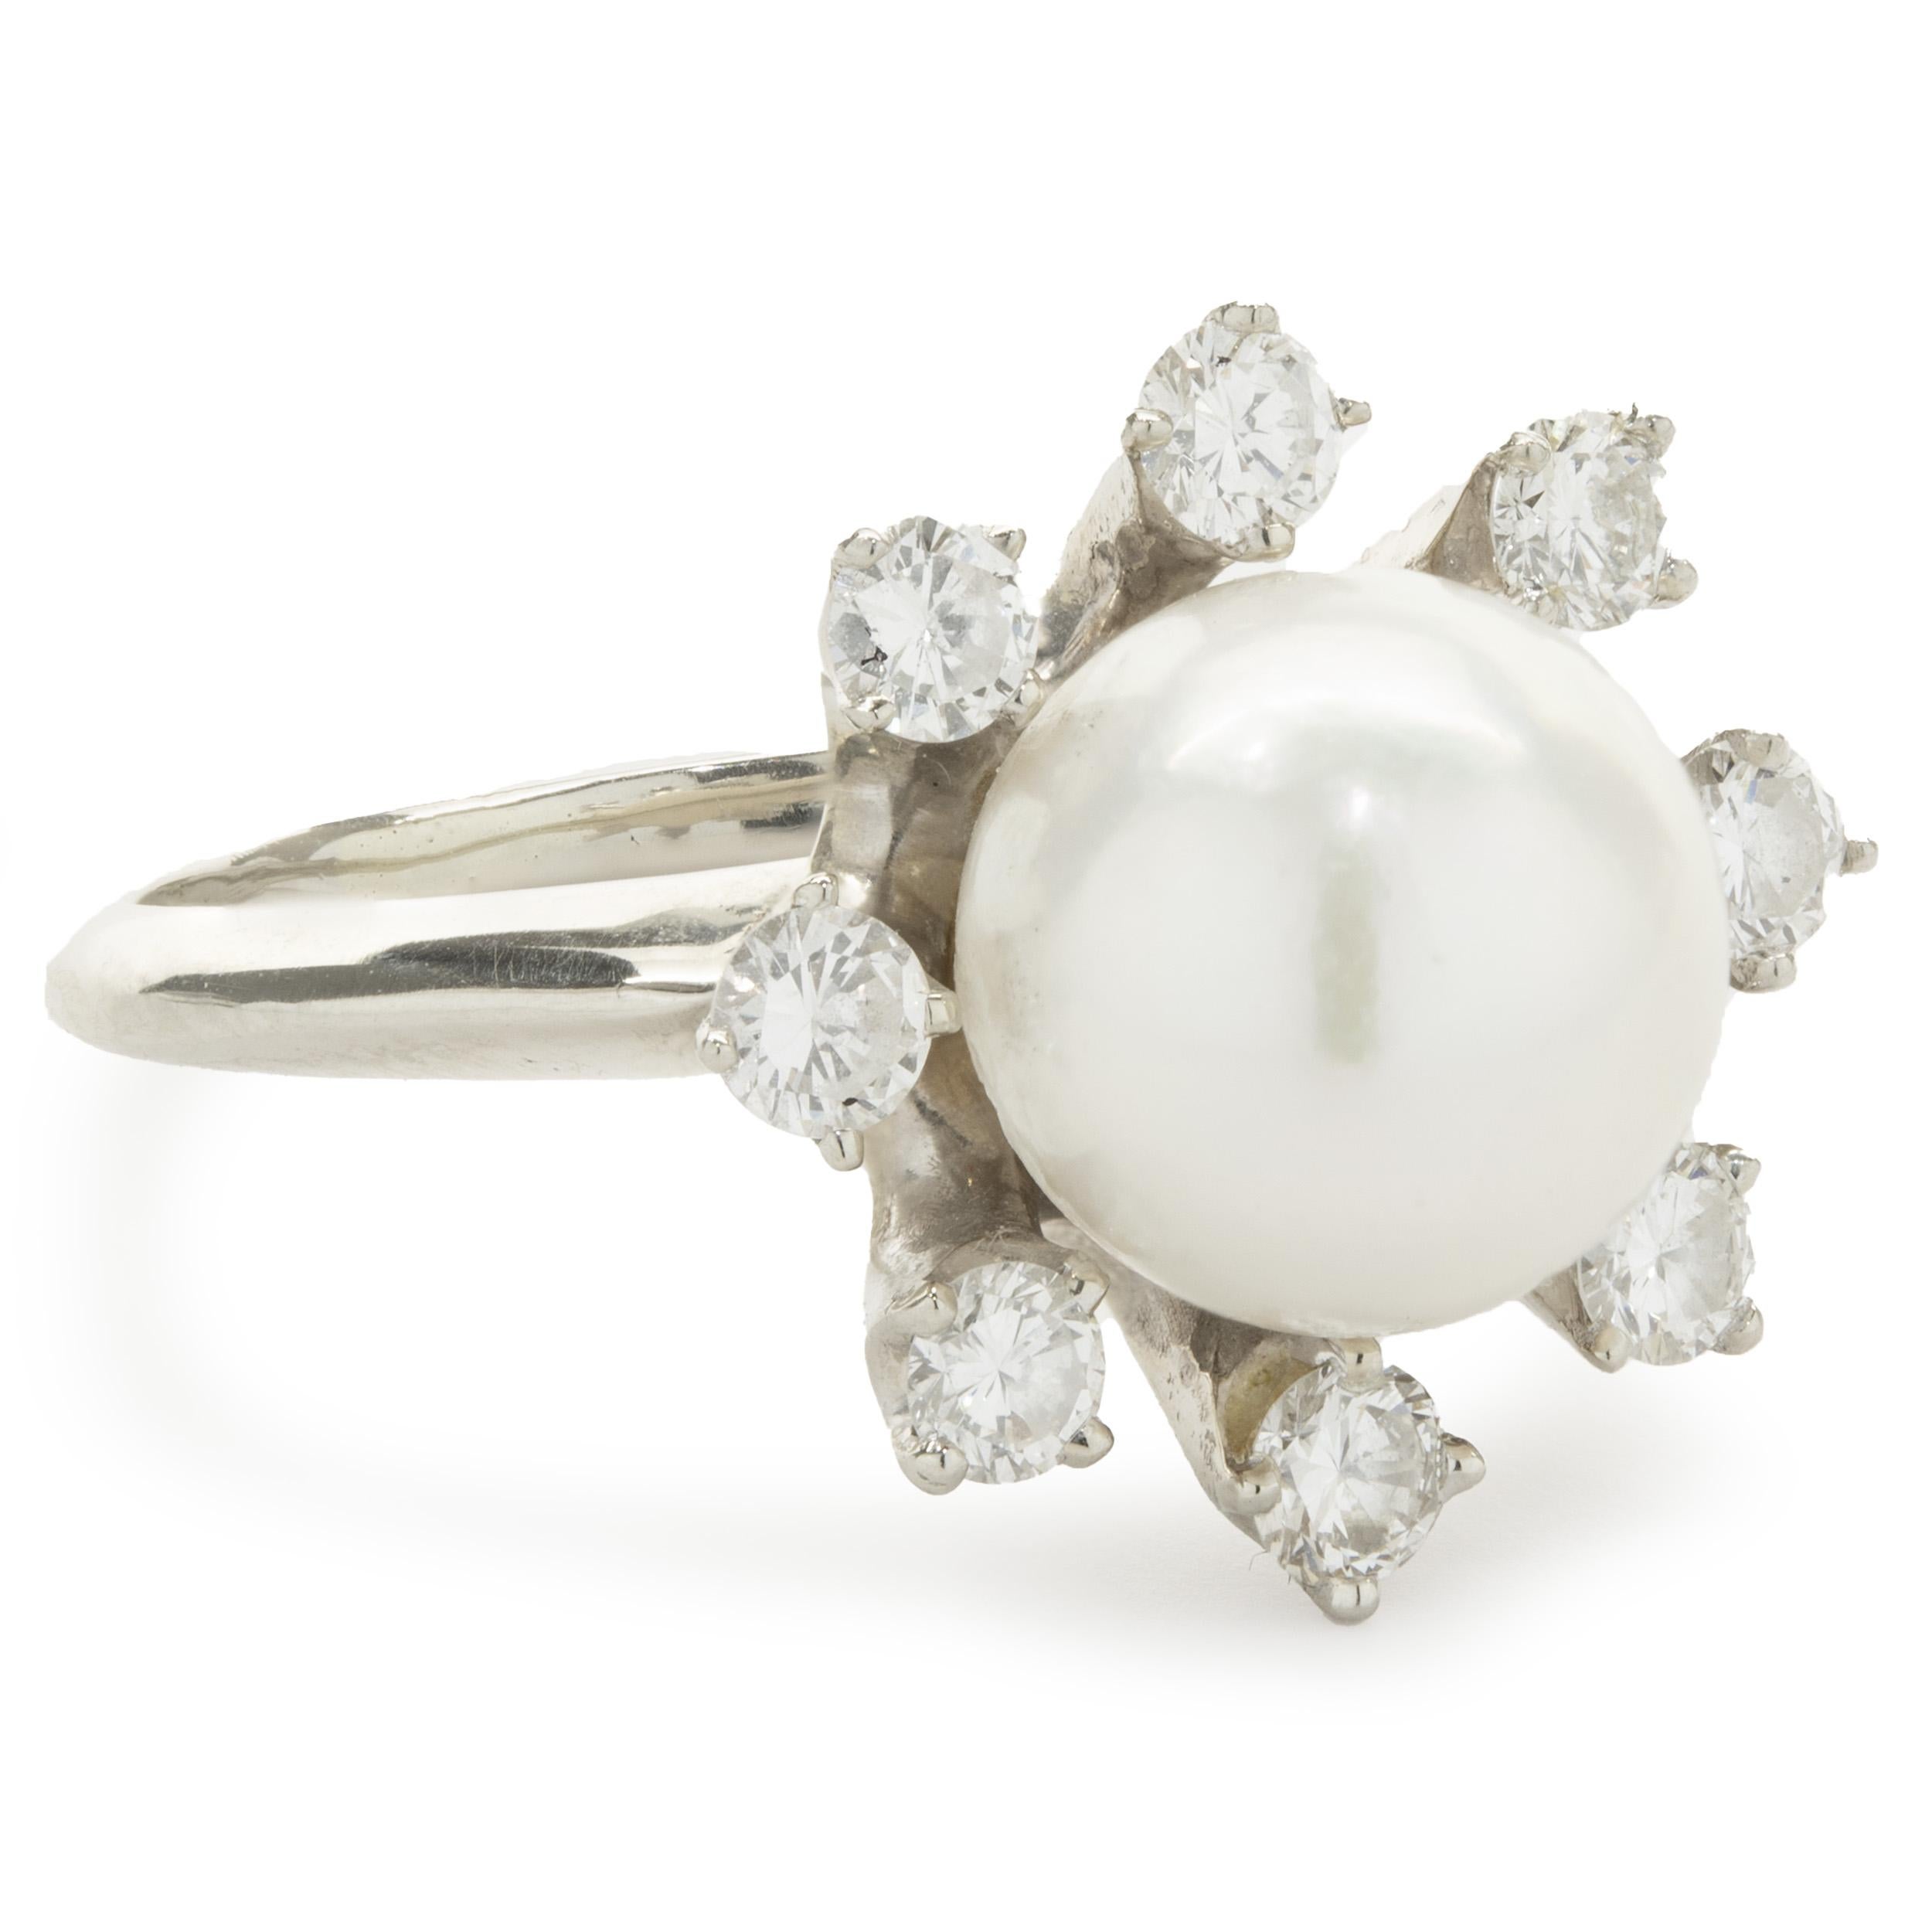 Designer: custom design
Material: 18K white gold
Akoya Pearl: 9mm
Diamond: 8 round brilliant cut = 0.56cttw
Color: G
Clarity: SI1
Ring Size: 5.5 (please allow two additional shipping days for sizing requests)
Dimensions: ring top measures